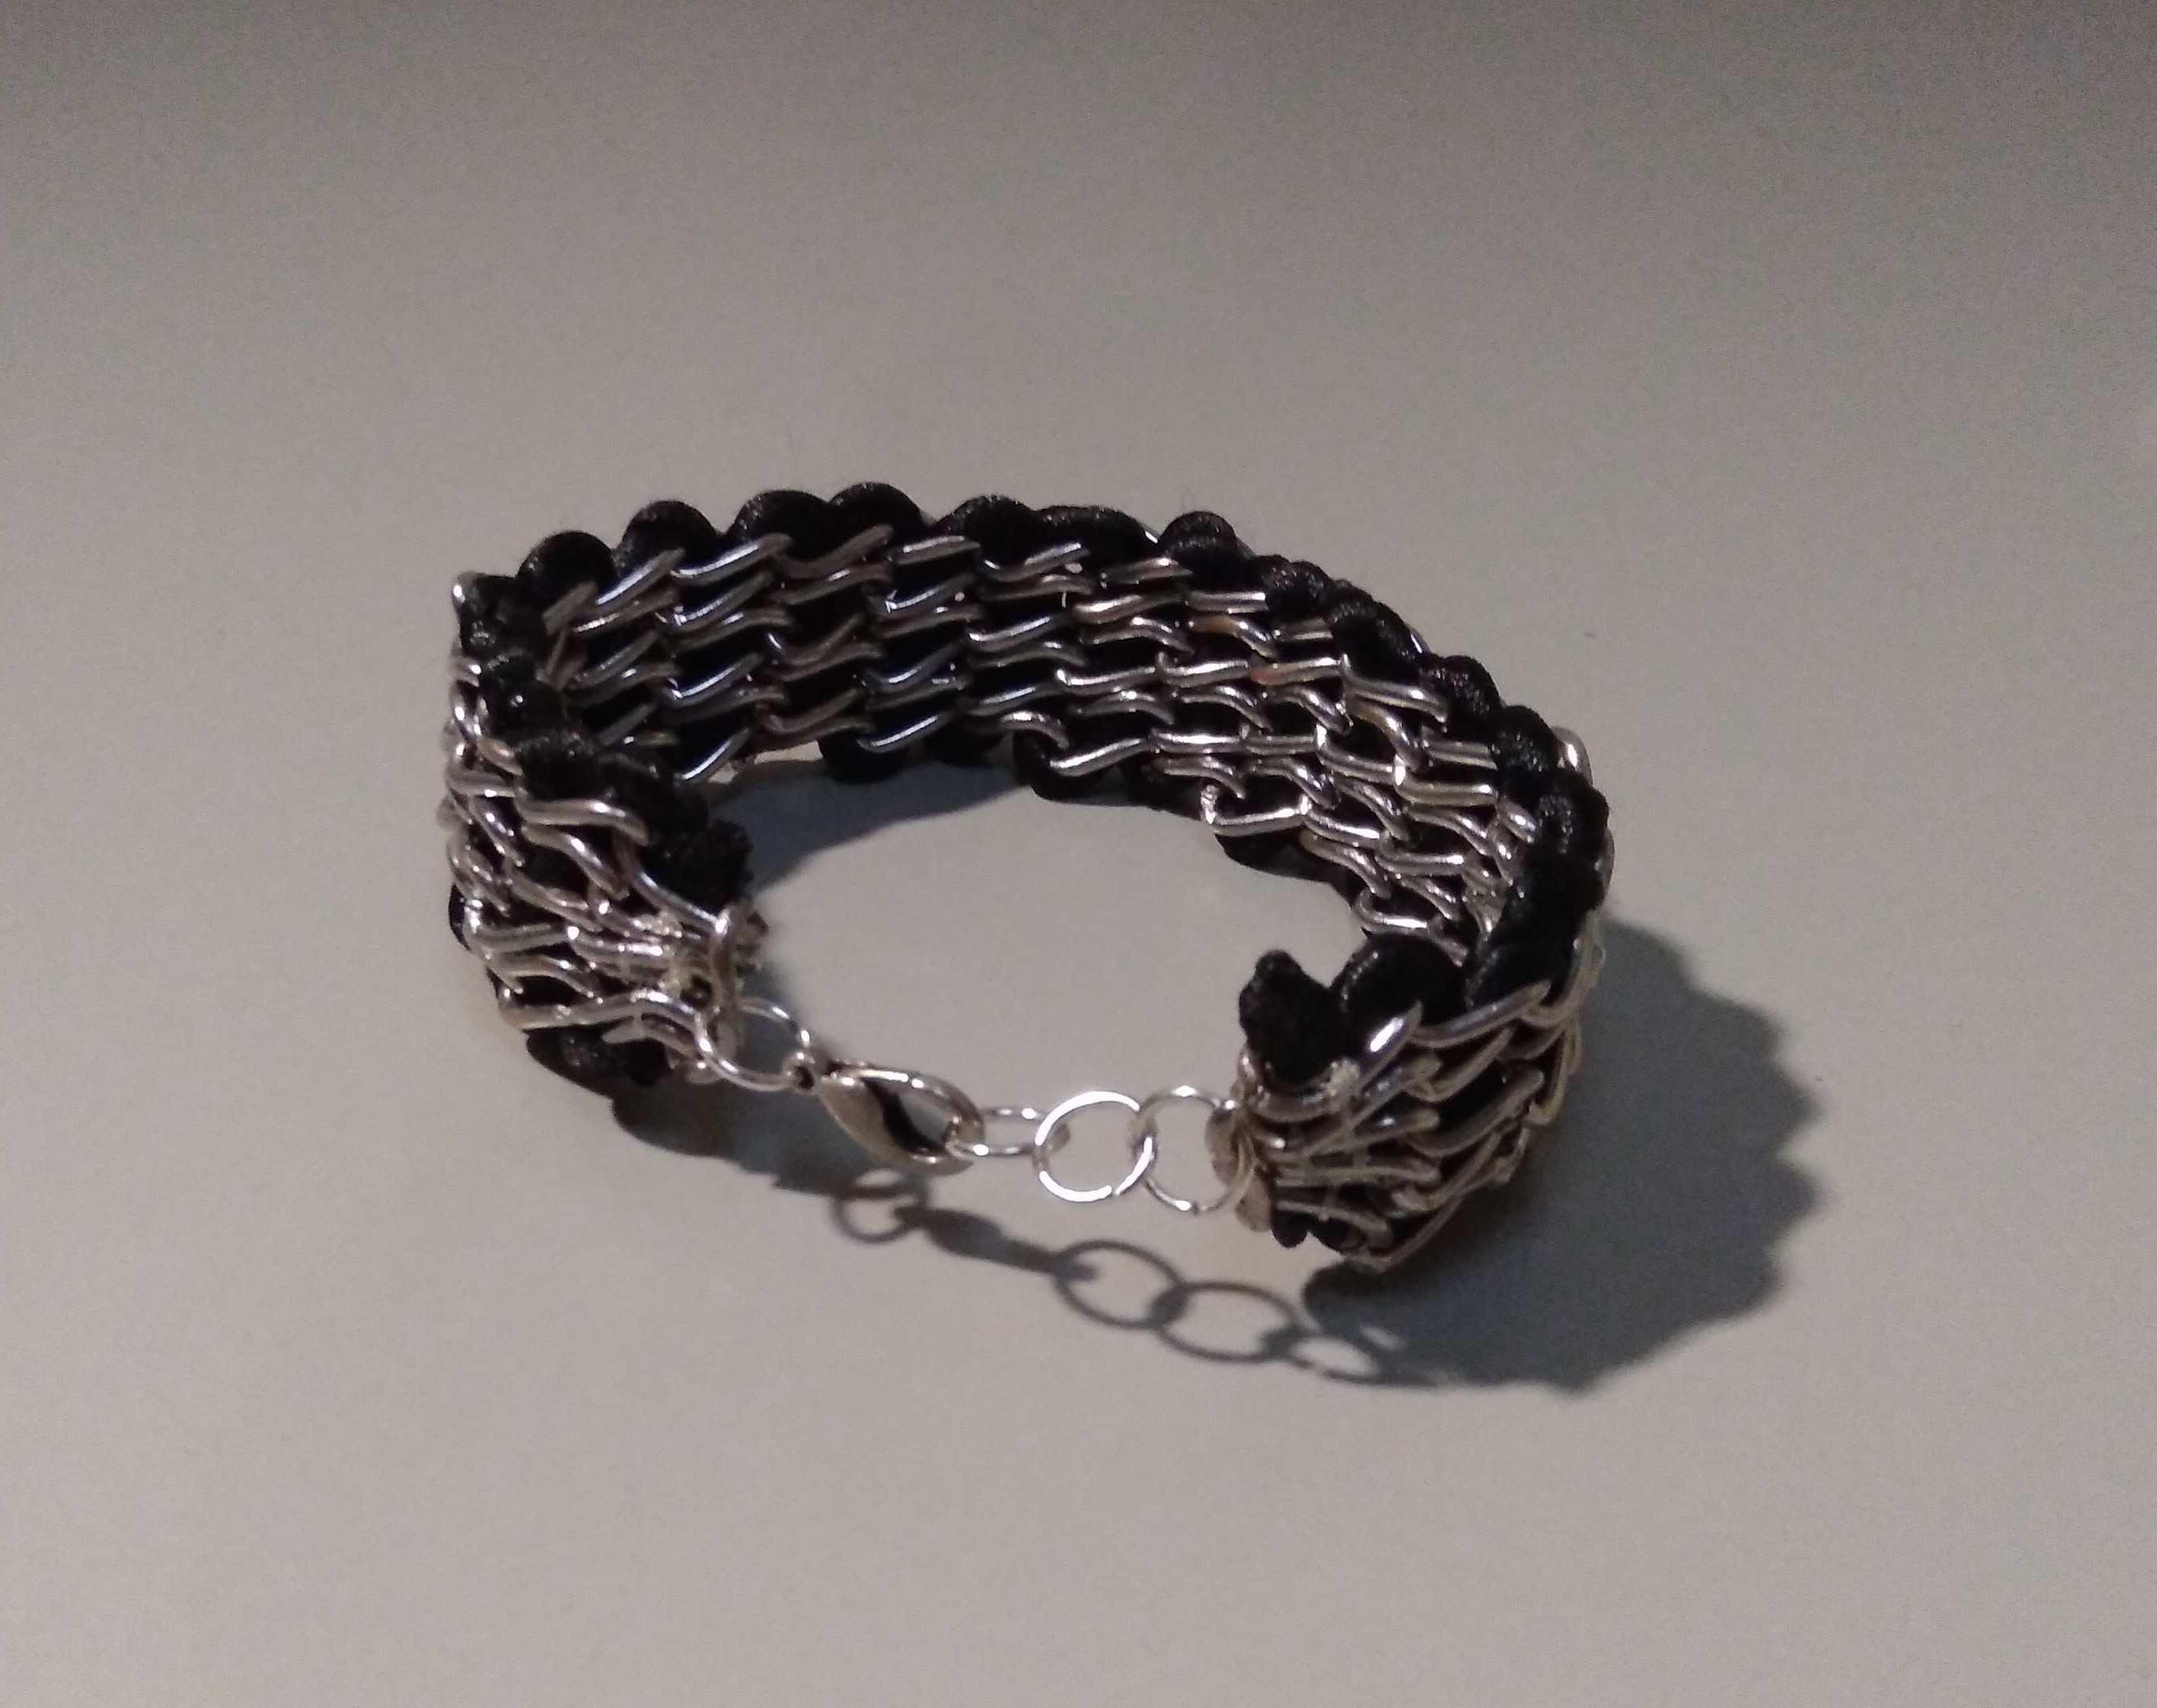 Chain and Intertwined Thread Bracelet